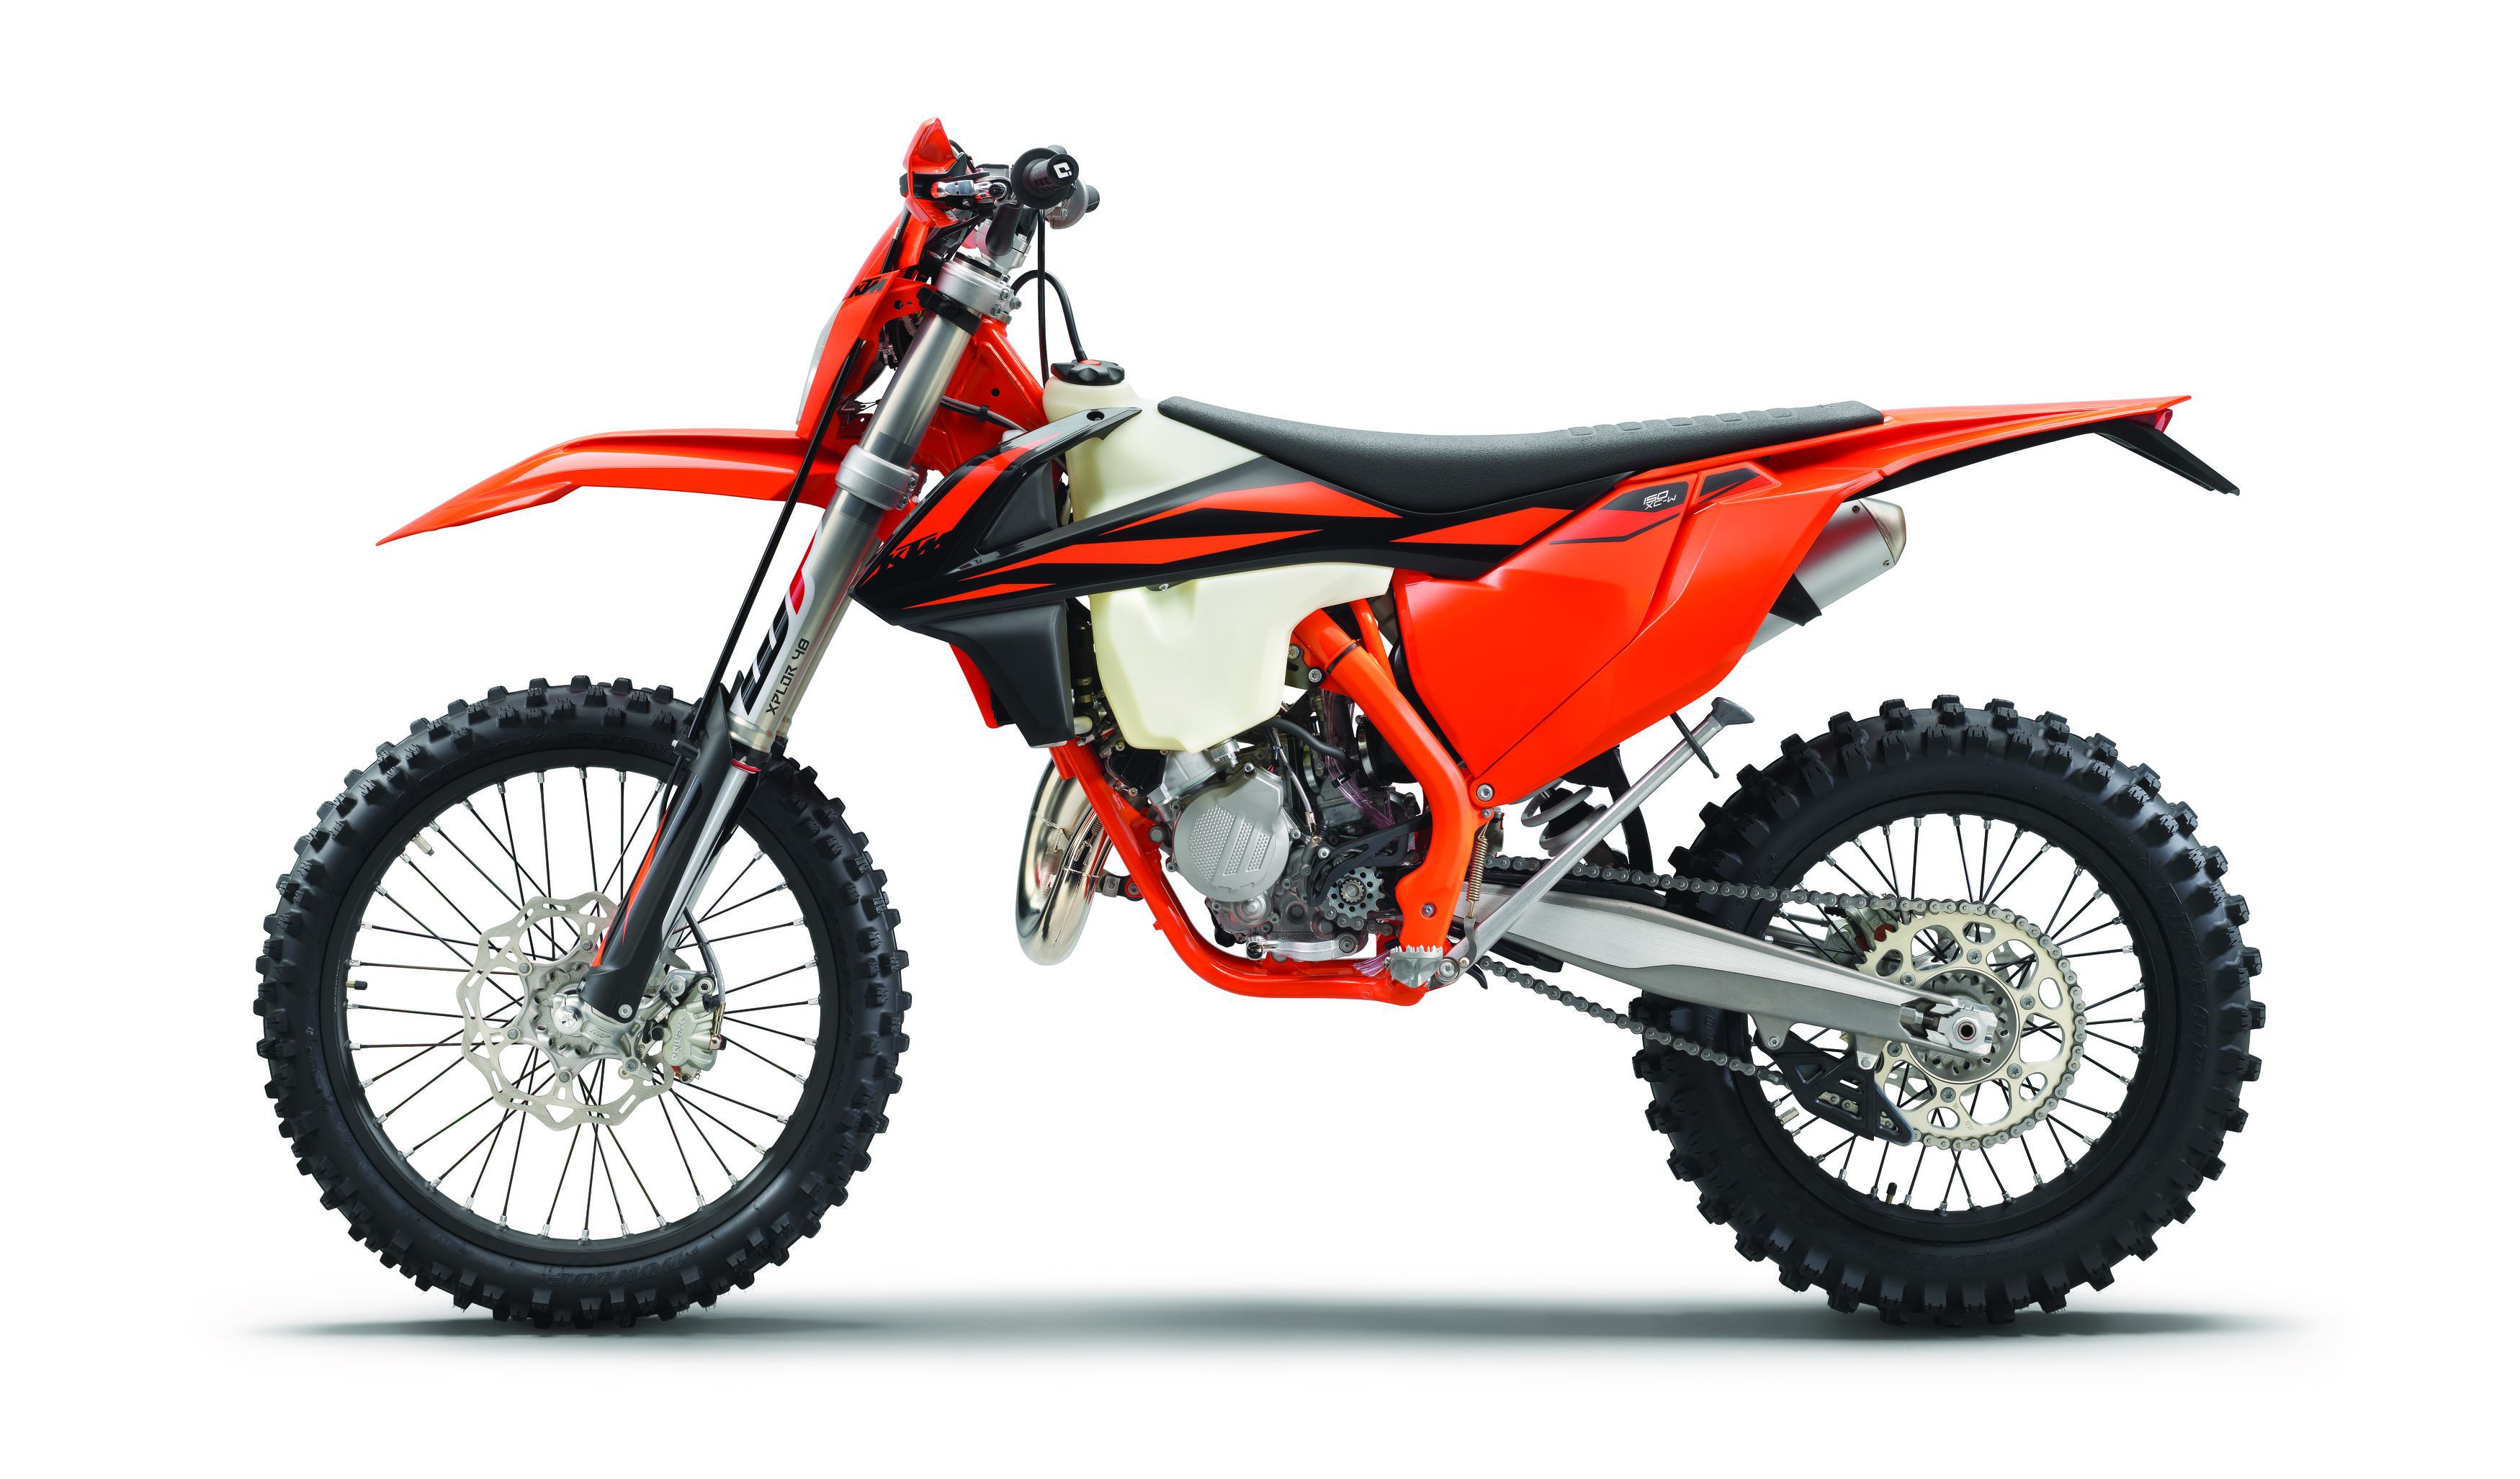 2019 125cc 200cc Two Stroke Off Road Dirt Bikes You Can Buy Dirt Rider